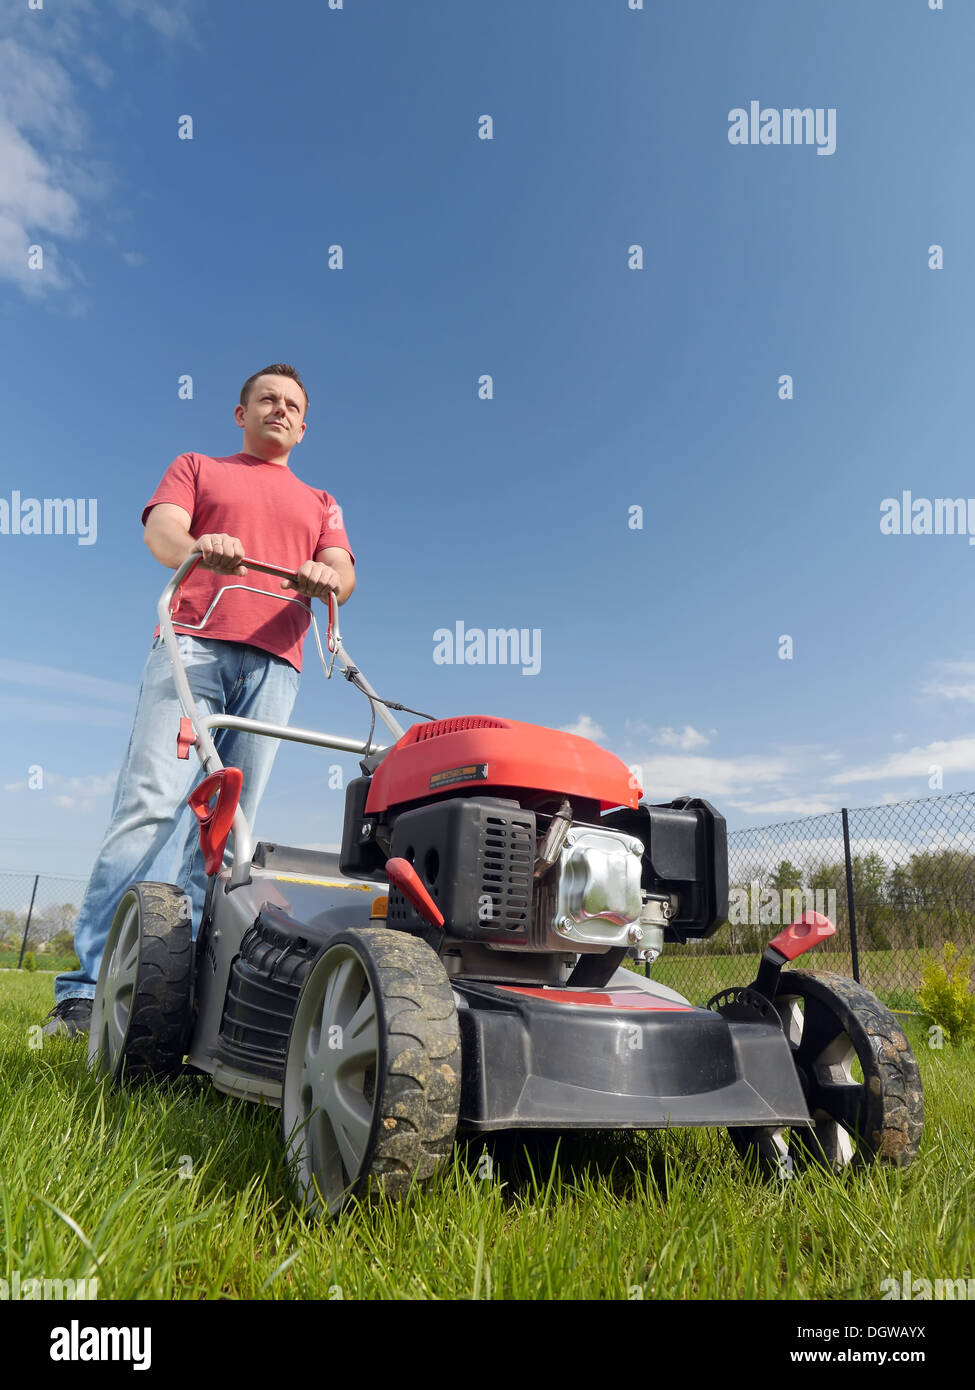 Man mowing grass in his backyard with grass-mower Stock Photo